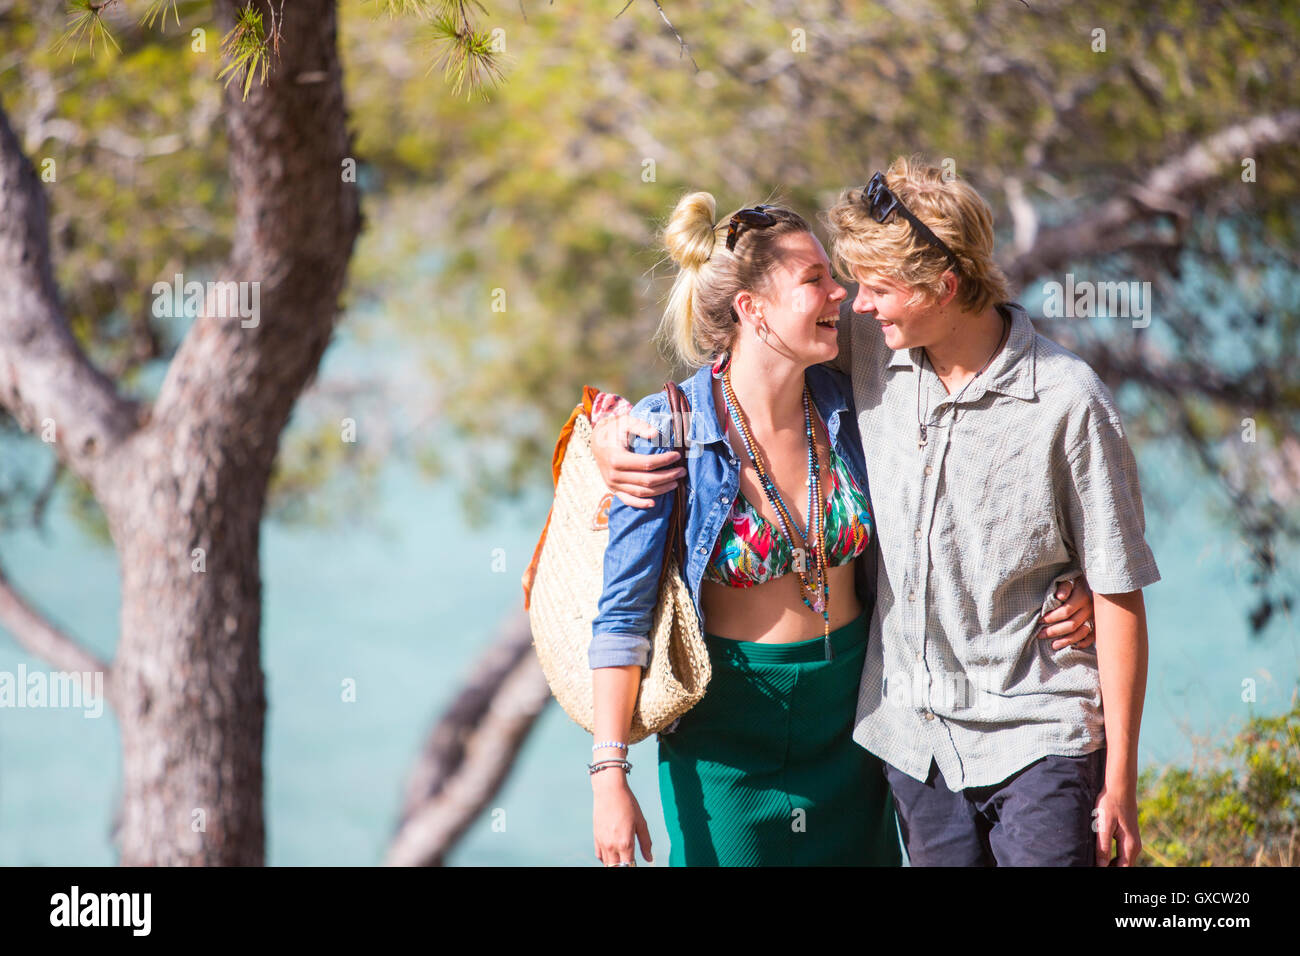 Couple with arms around each other, face to face smiling, Majorca, Spain Stock Photo